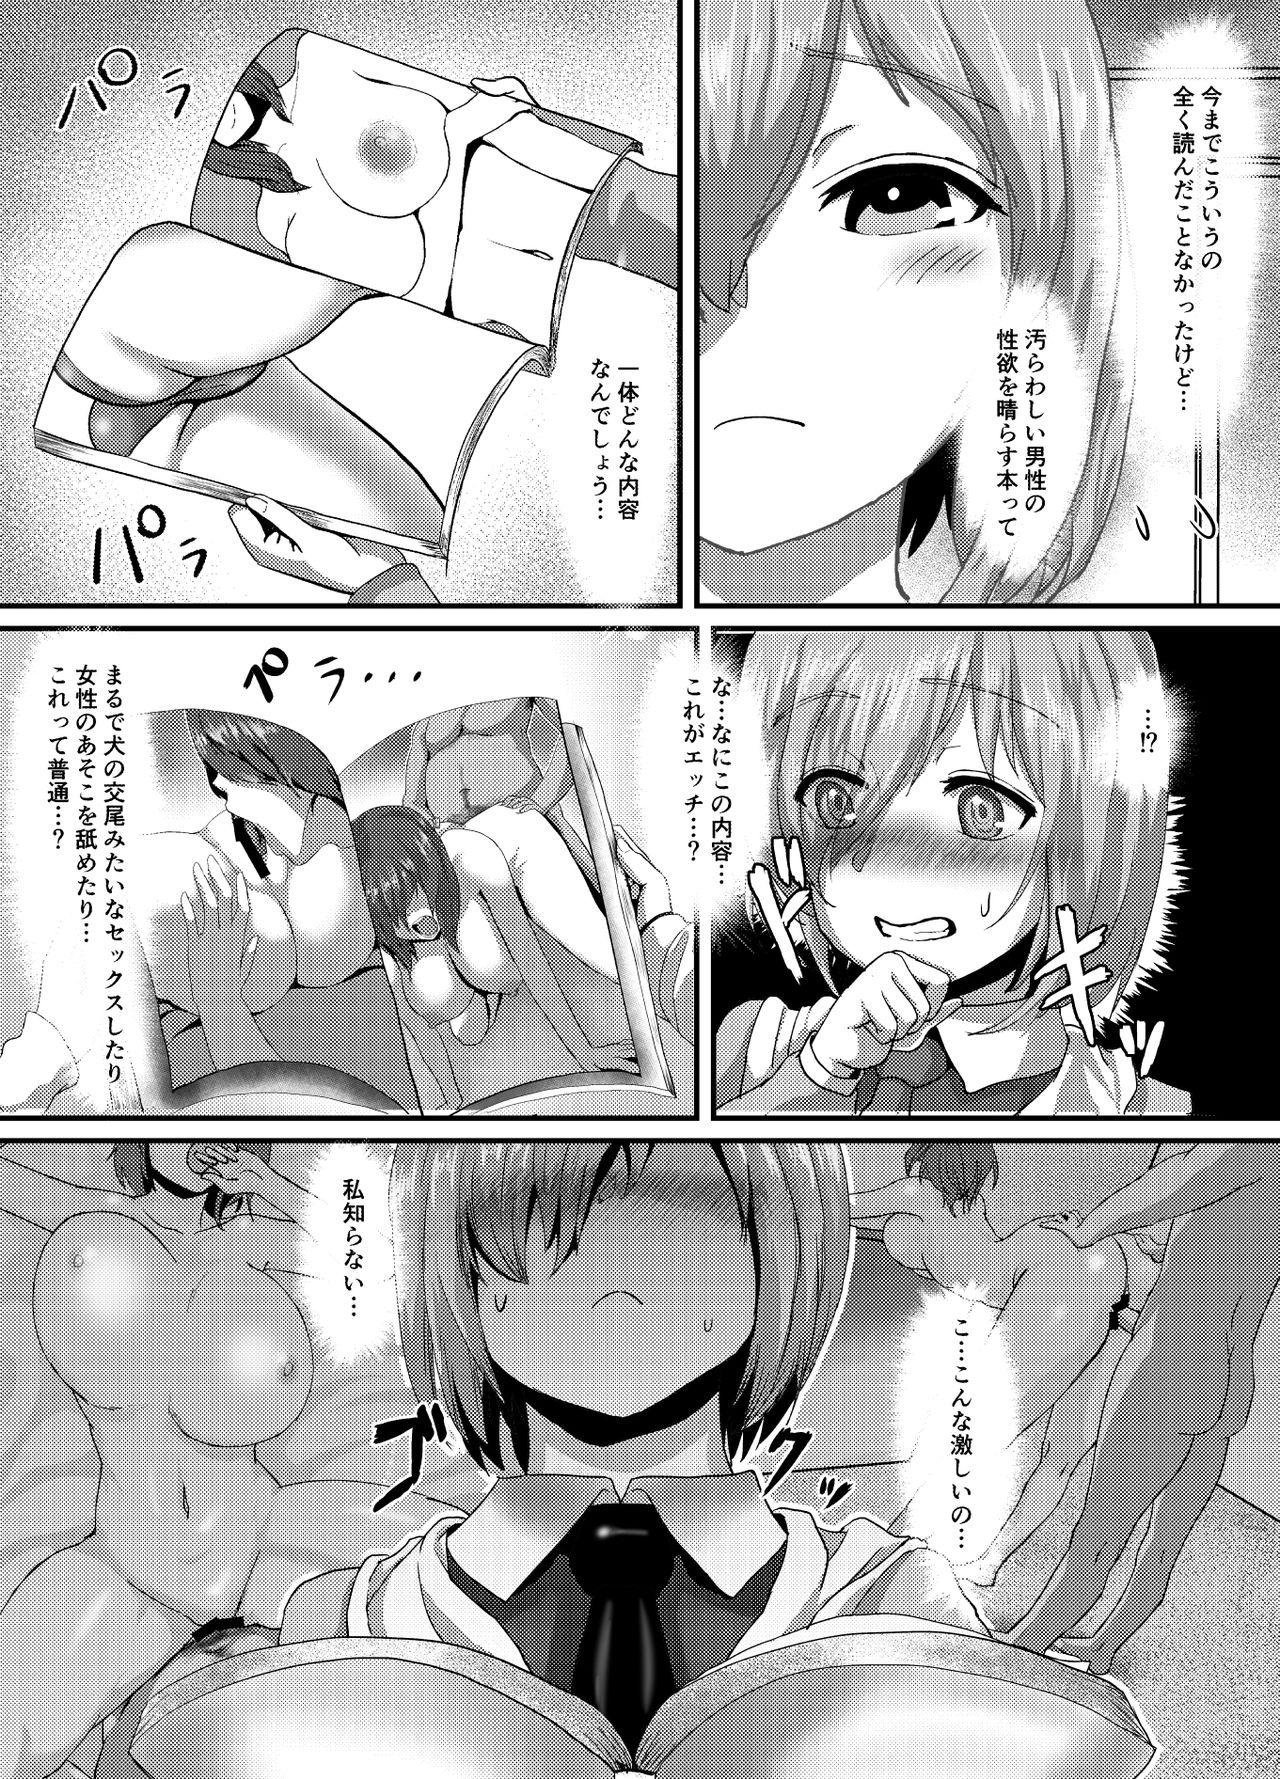 Sissy Pure Mashu Gives In to Futanari Pleasure 1 & 2 - Fate grand order Young Men - Page 6